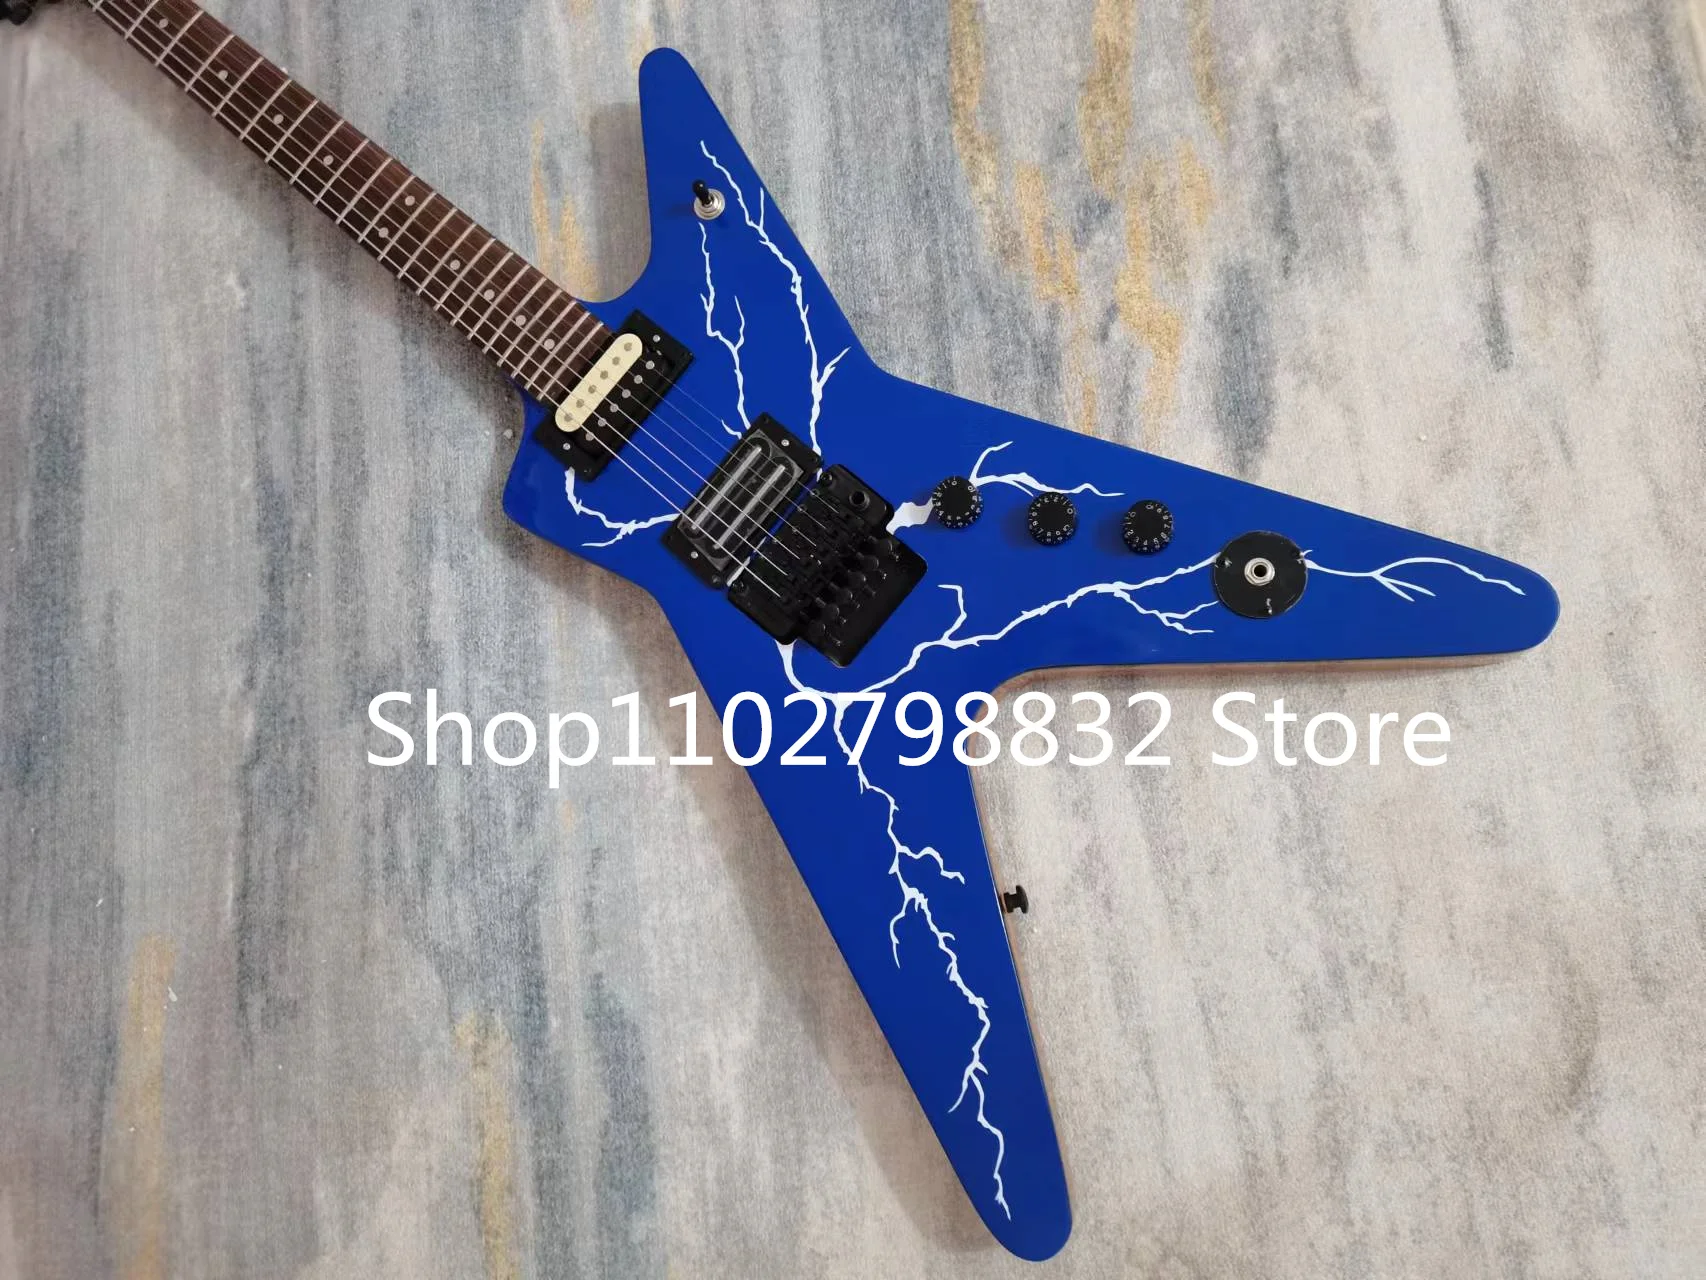 

6-string guitar, rosewood fingerboard, tremolo system, seller to bear shipping costs